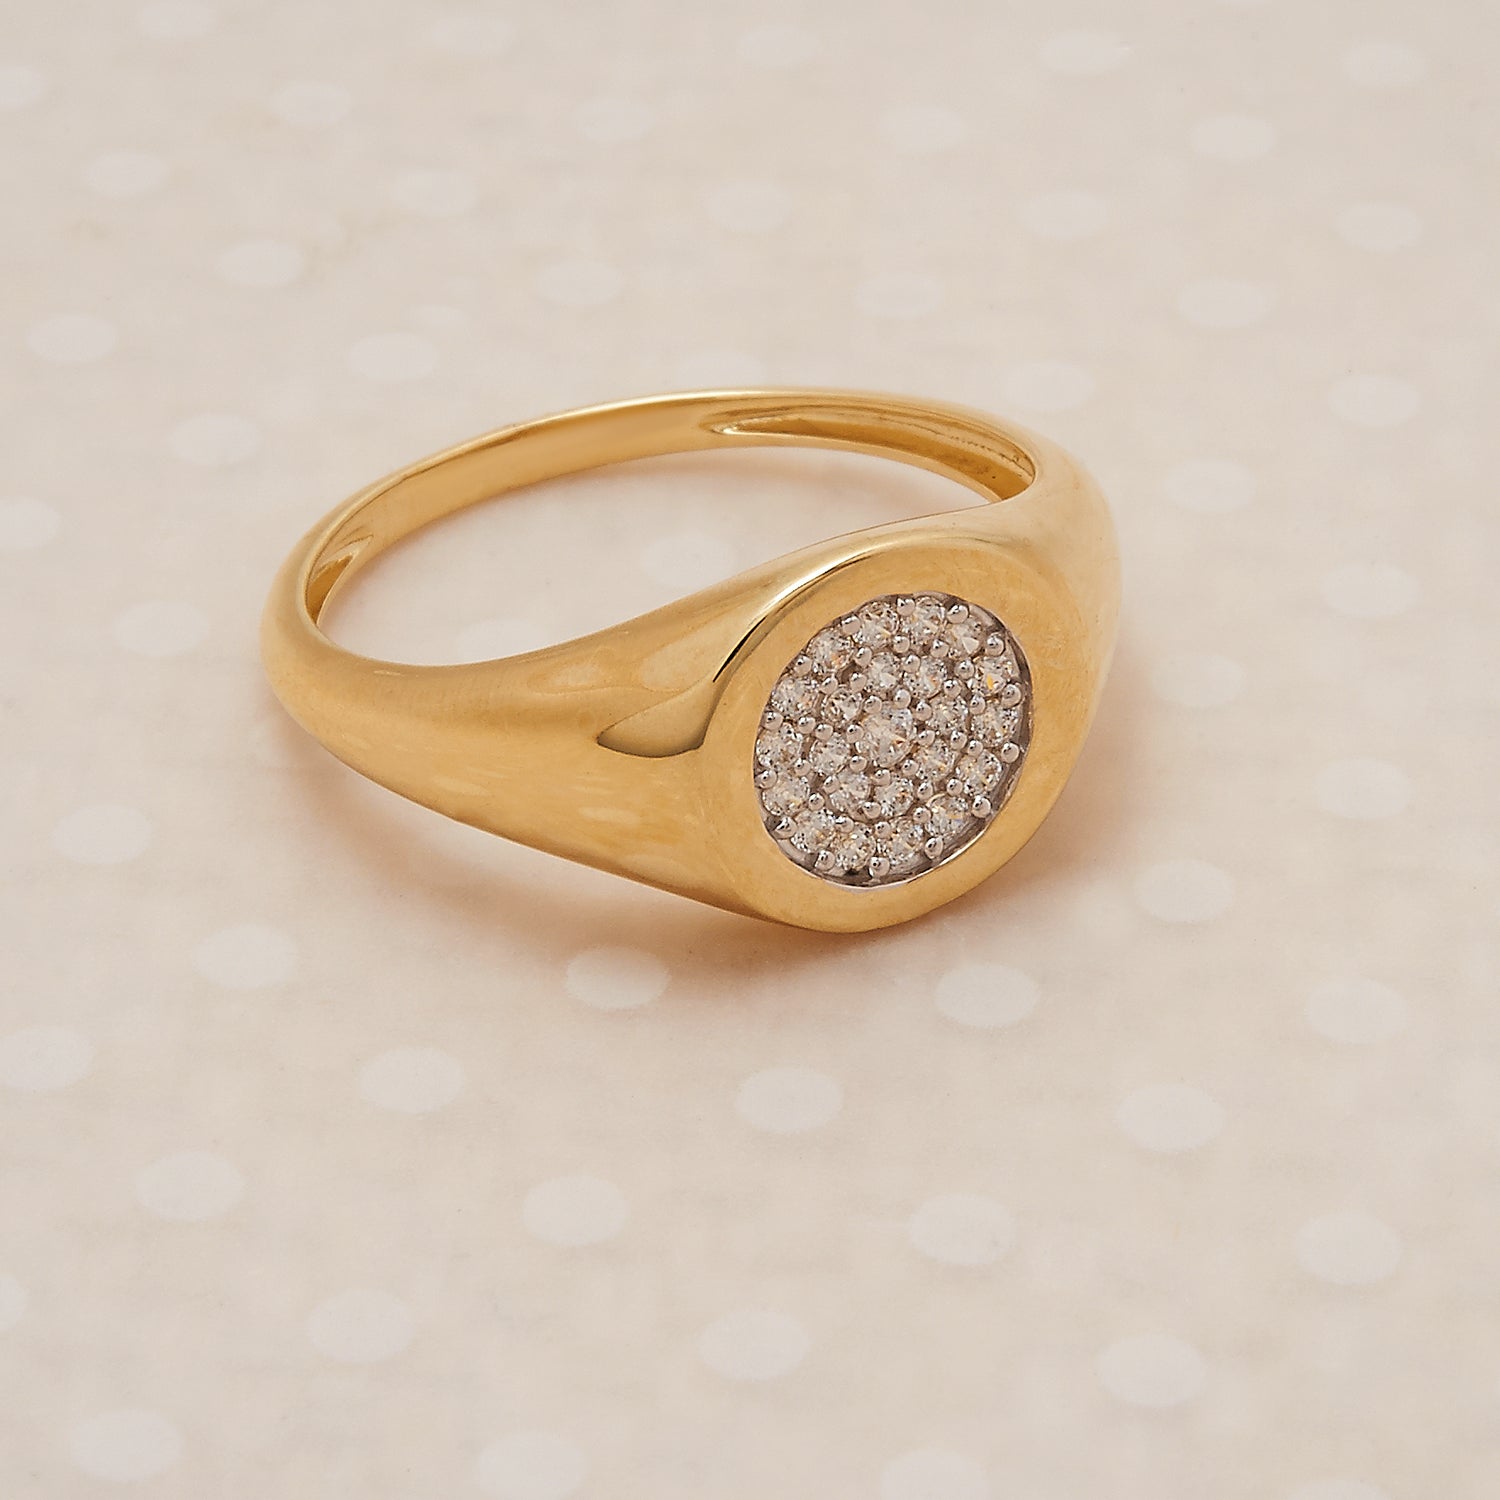 Sara Diamond Round Signet Ring with Yellow Gold for Hand